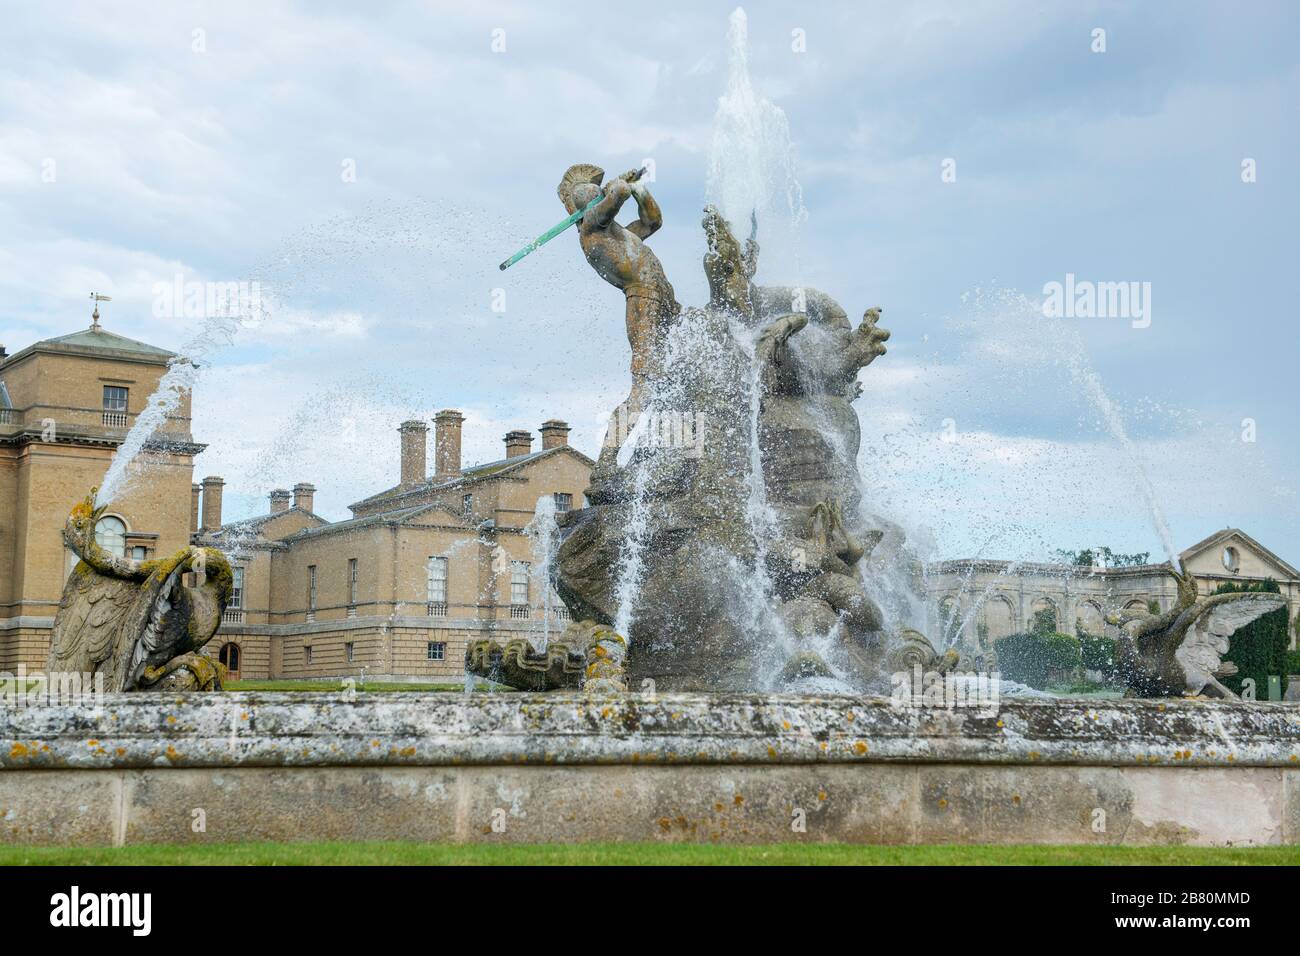 The Perseus and Andromeda fountain at Holkham Hall in Norfolk, England Stock Photo